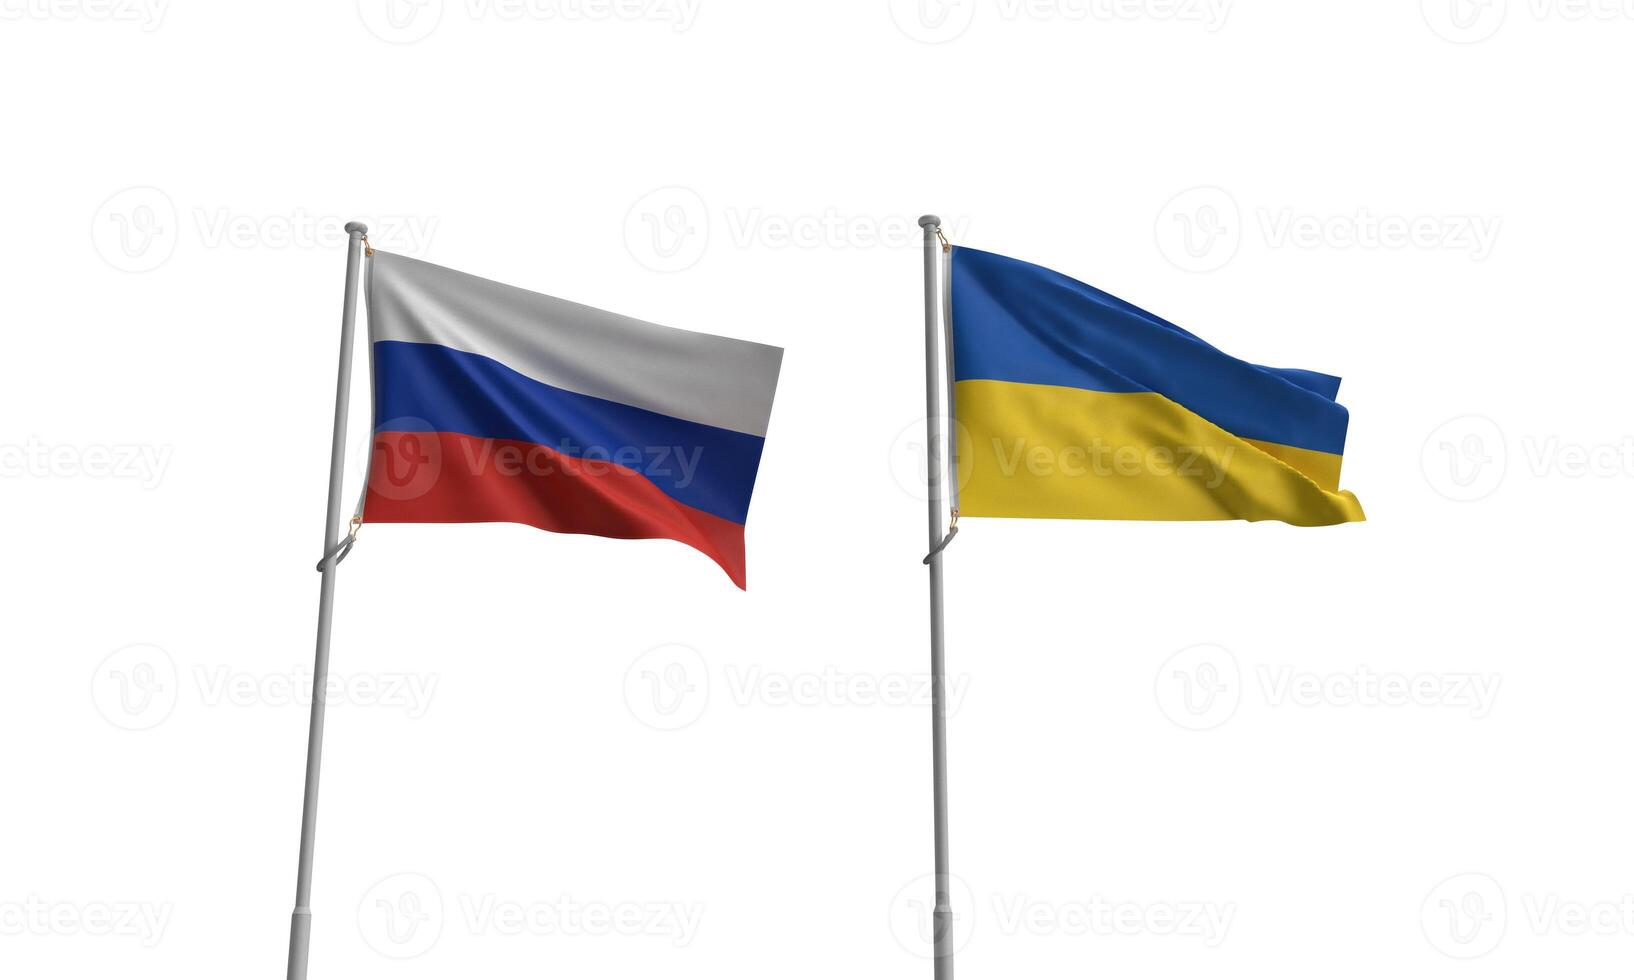 war conflict ukraine military crisis flag russian army battle ukrainian attack fight kiev government politic invasion person people weapon freedom concept aggression danger soldier independence force photo